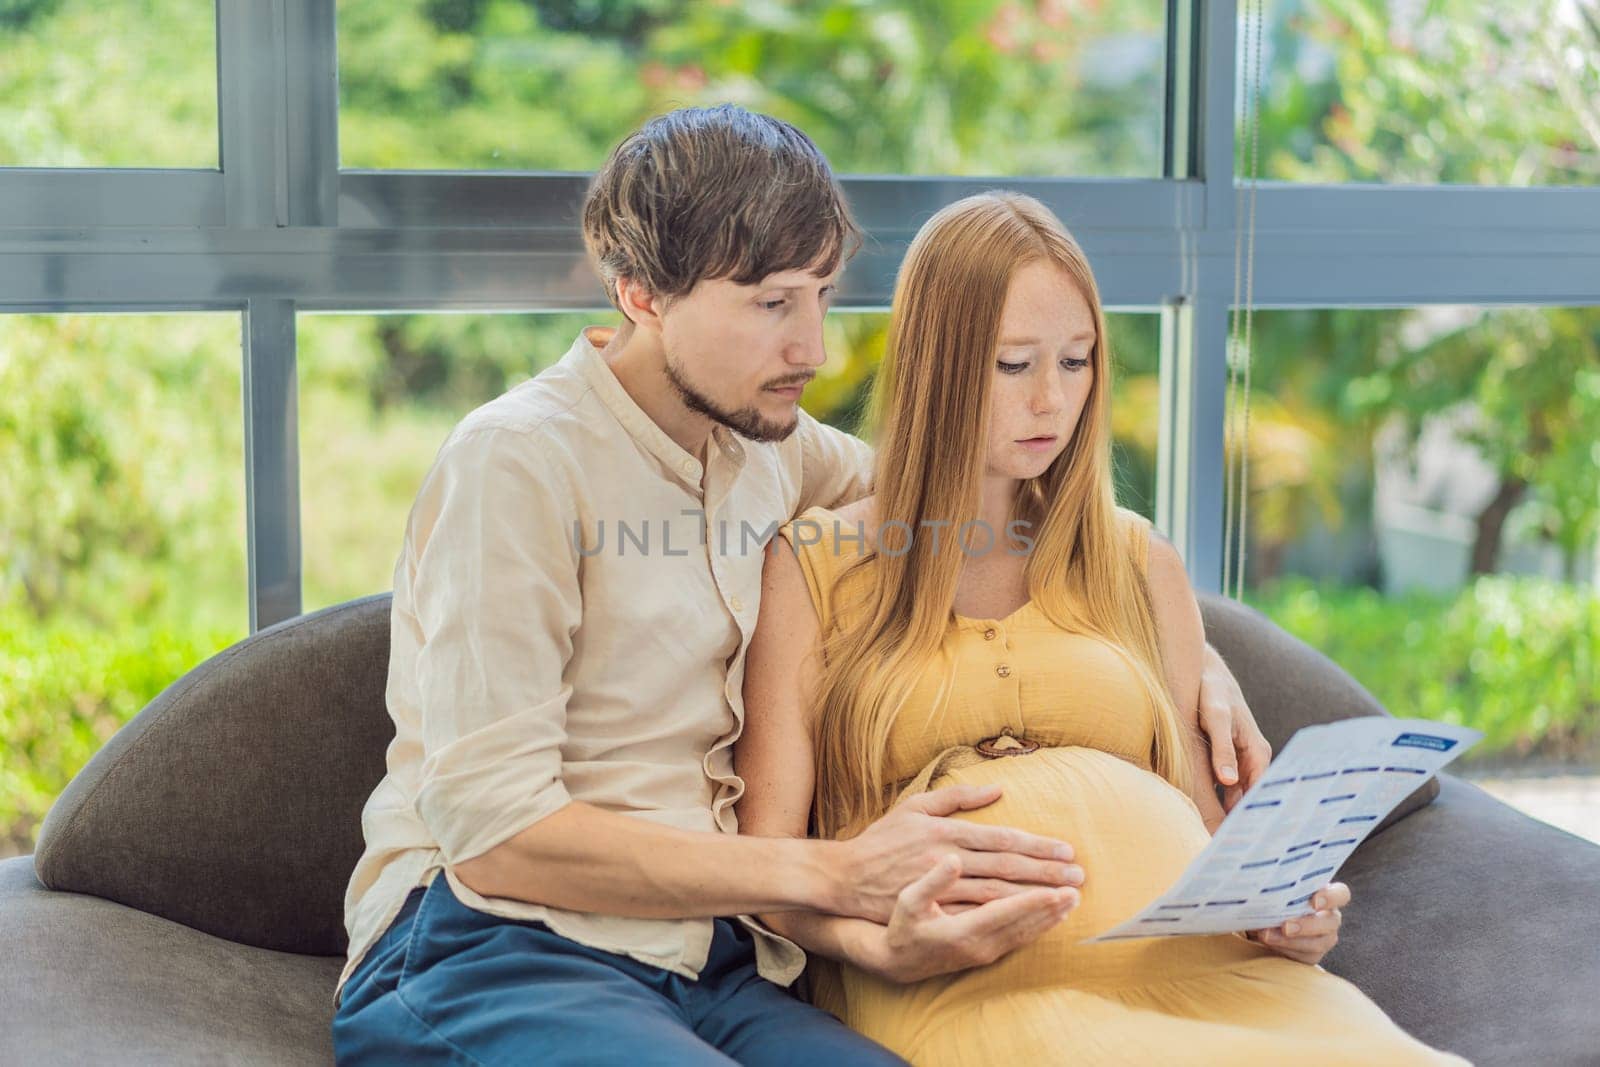 Expectant couple reviews blood test results, navigating pregnancy together with concern and anticipation by galitskaya